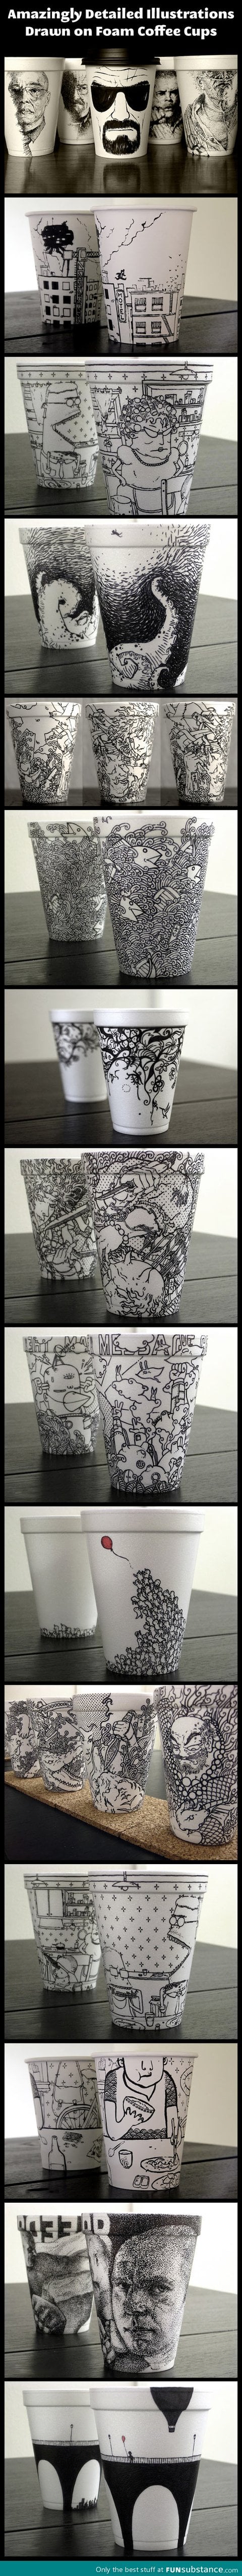 Awesome coffee cup designs